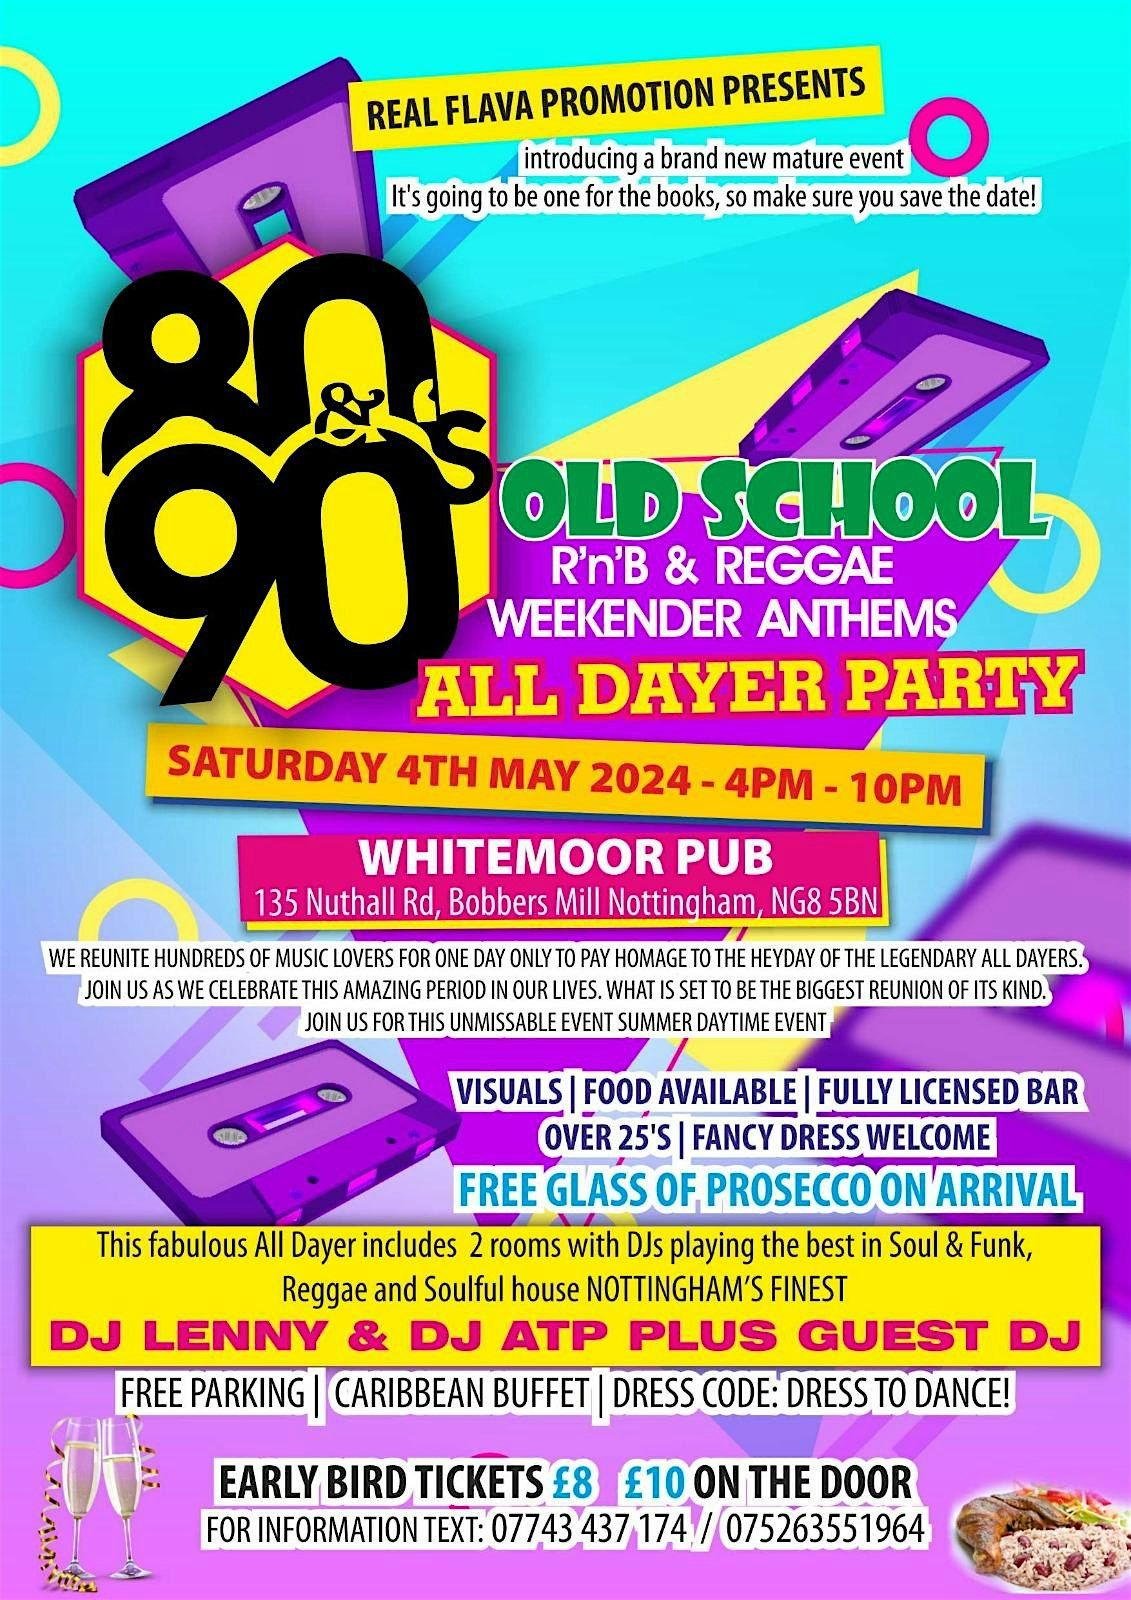 WE LIKE IT OLD SKOOL - RnB & Reggae Bank Holiday Special 4th May